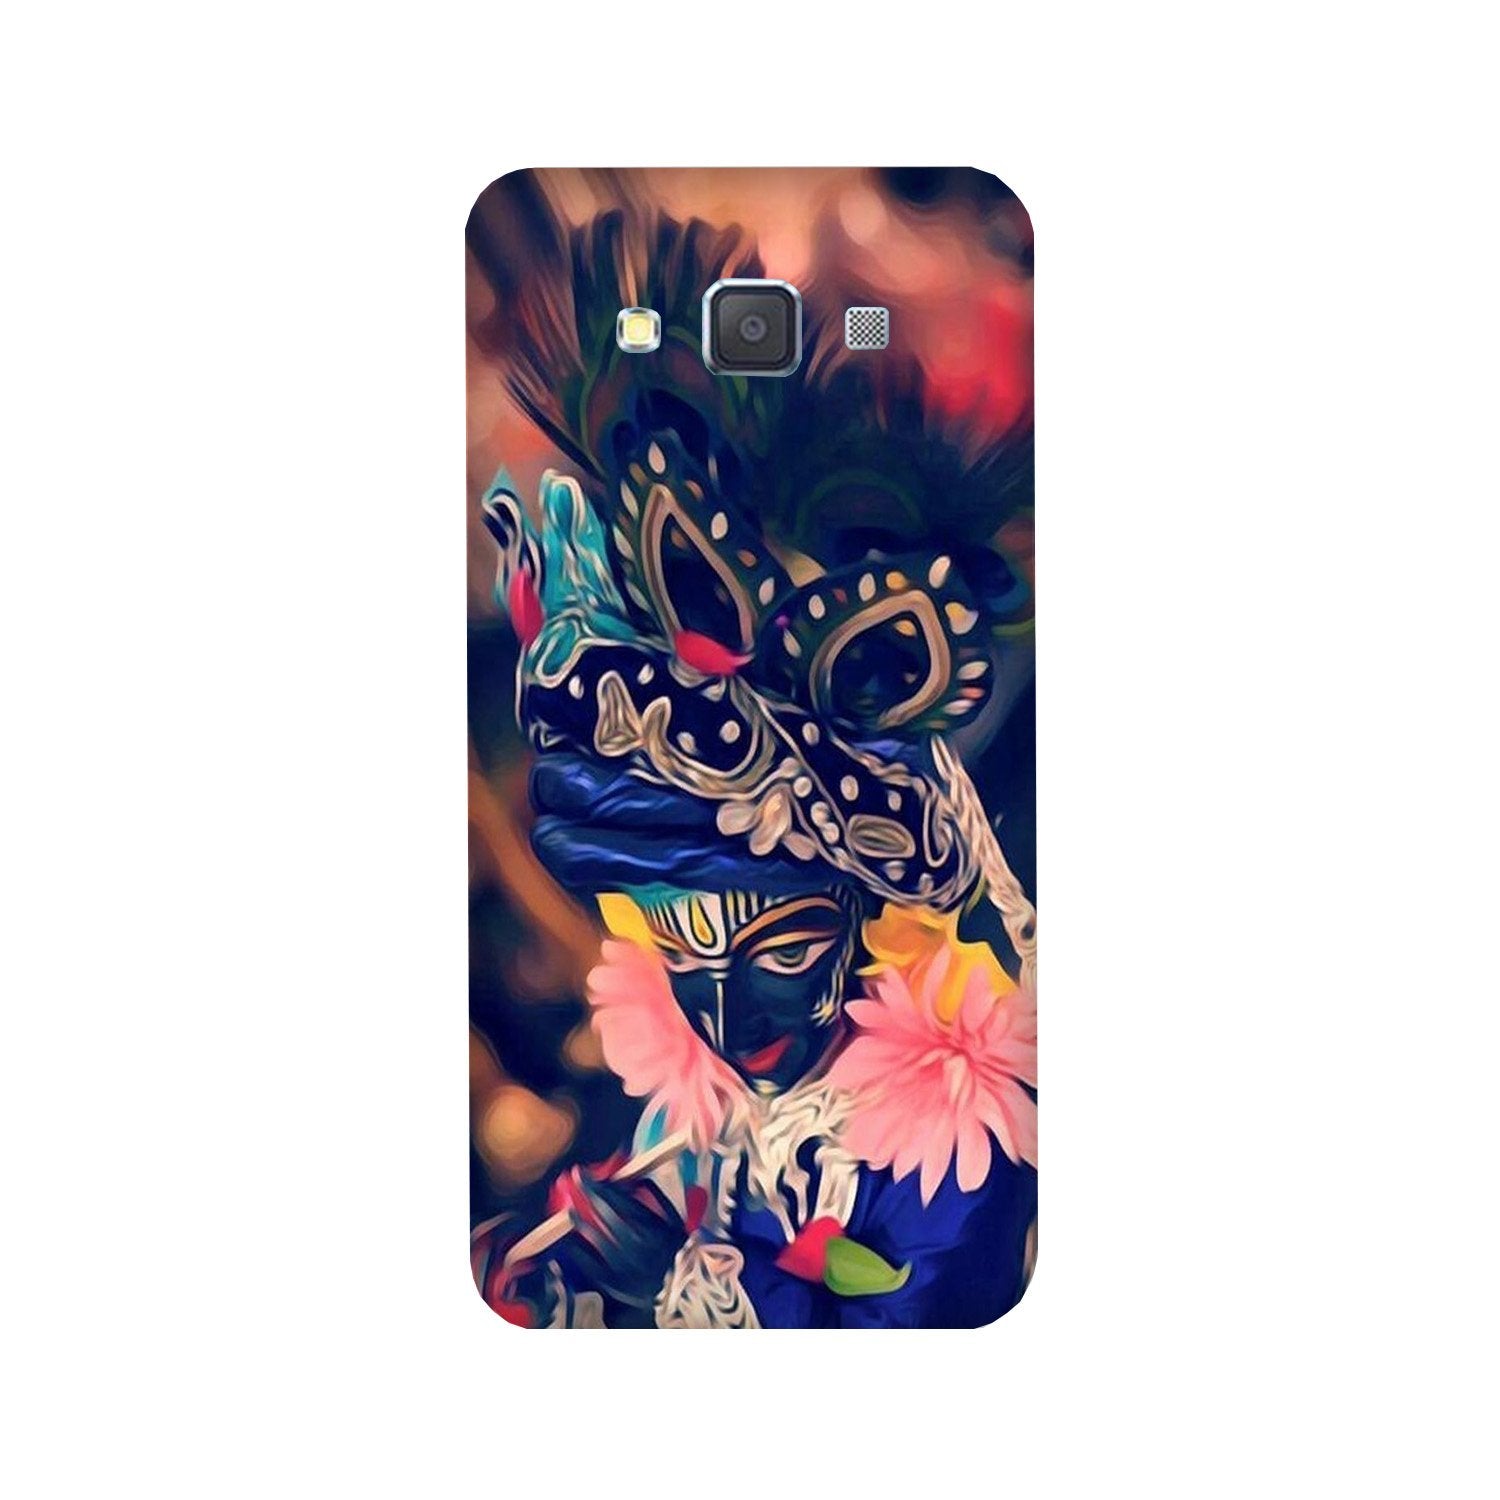 Lord Krishna Case for Galaxy ON7/ON7 Pro